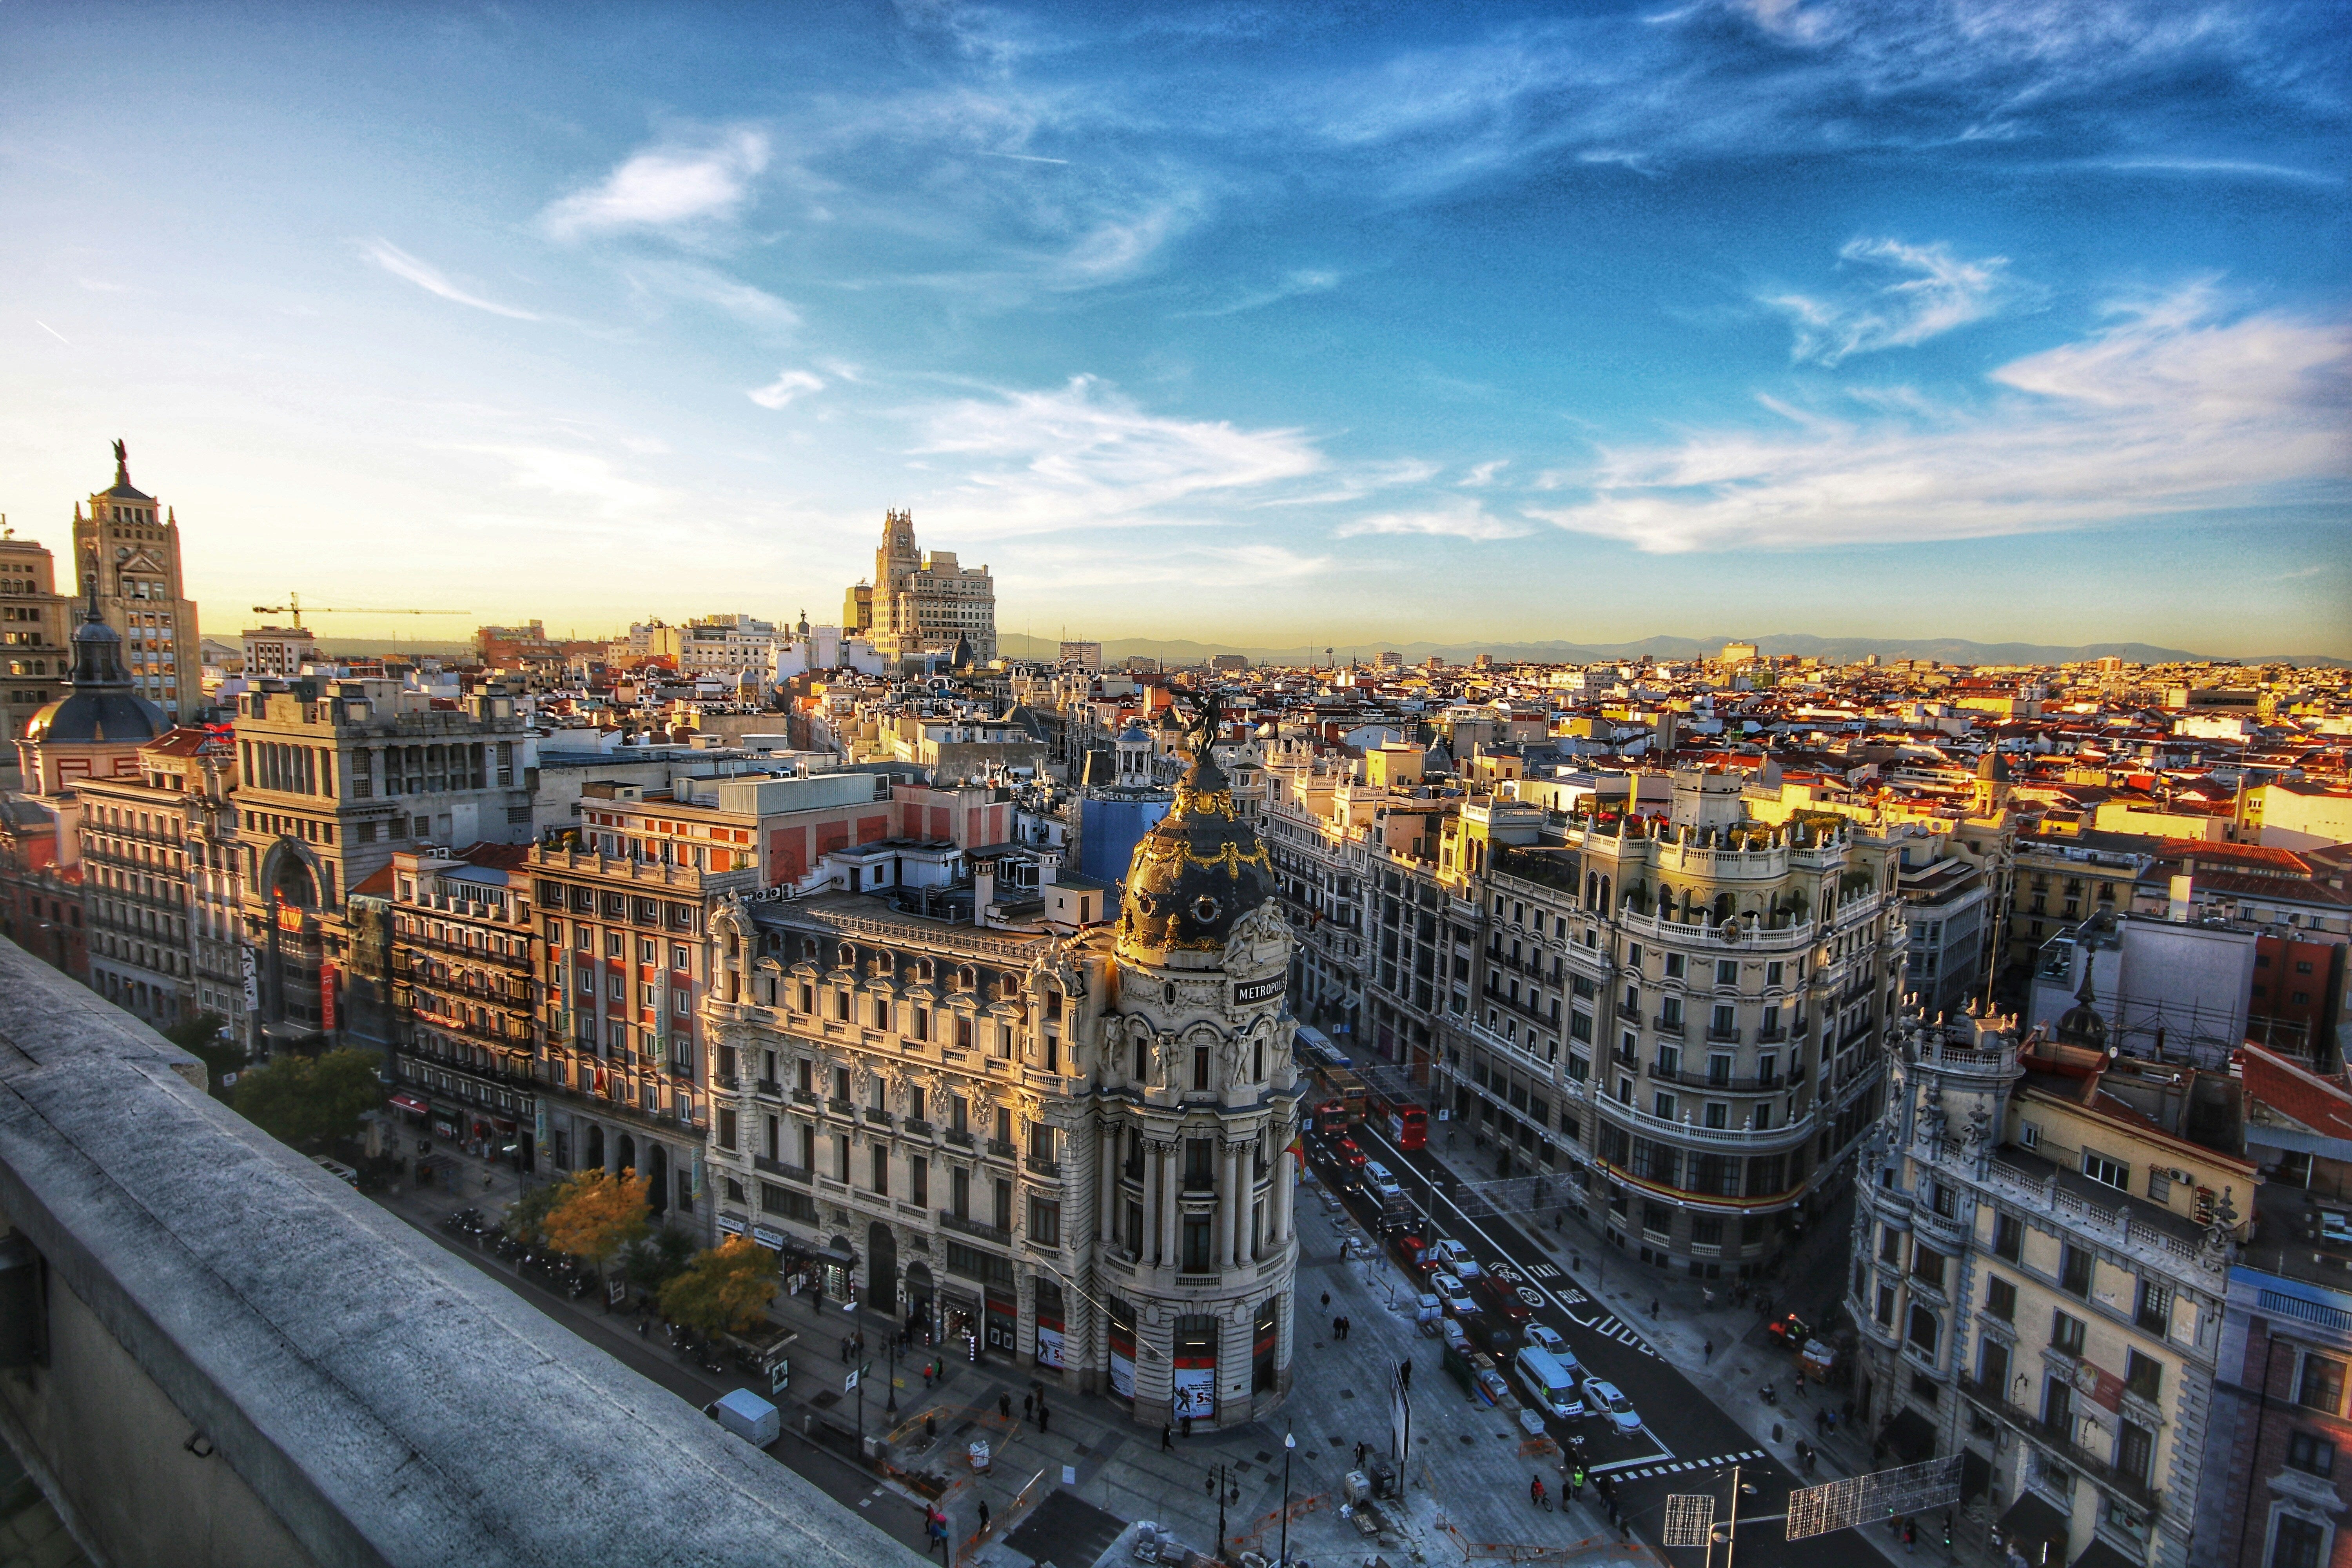 Madrid has a more authentically Spainish feel than sometimes overly touristy Barcelona